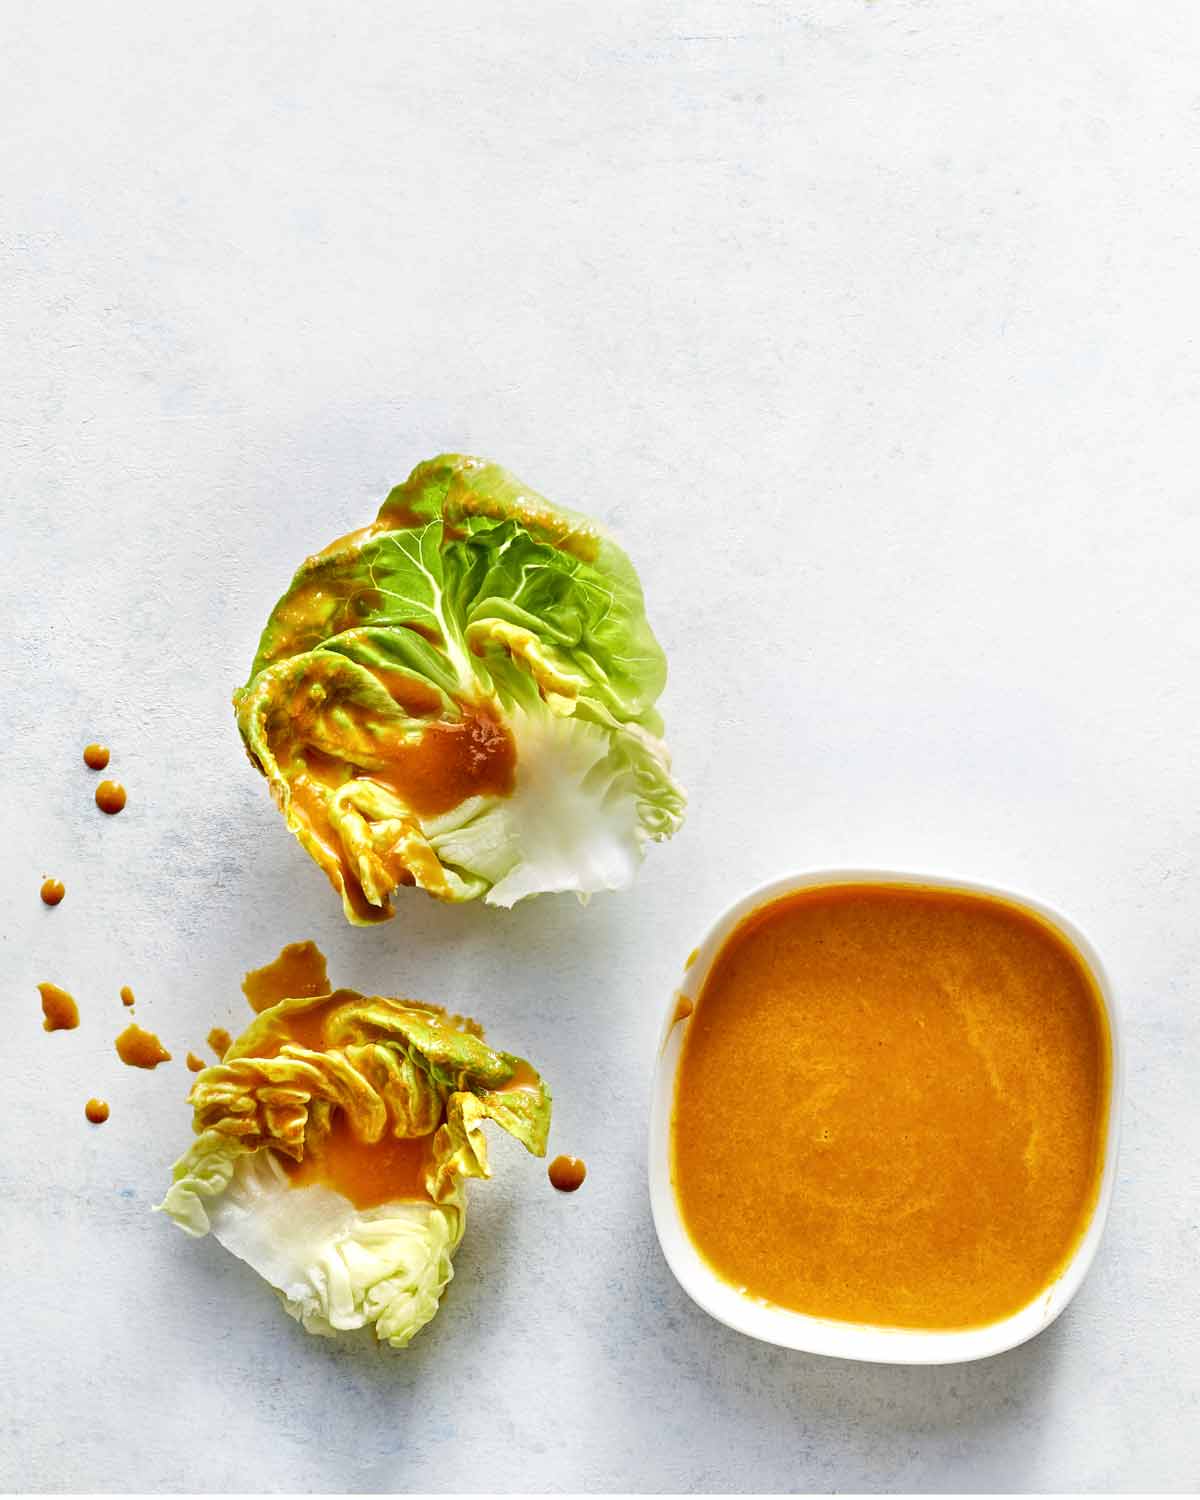 A small cup of carrot ginger dressing with some drizzled over two pieces of lettuce lying beside it.